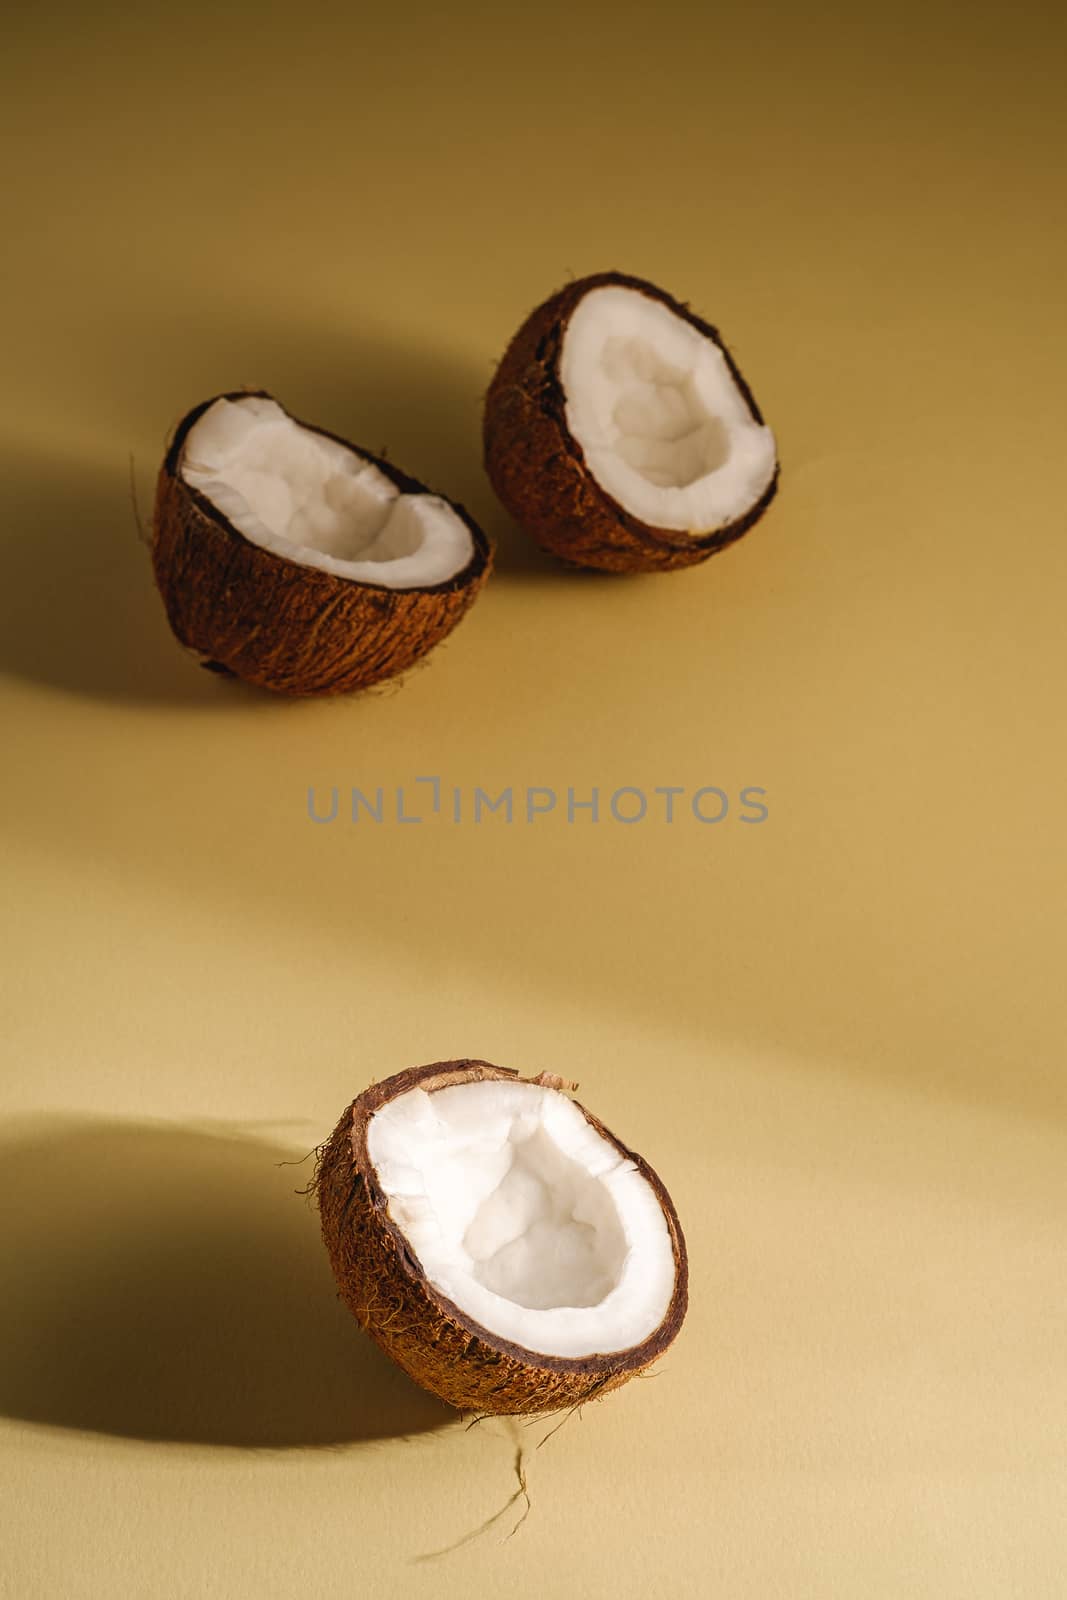 Coconut fruits on cream yellow plain background, abstract food tropical concept, angle view copy space